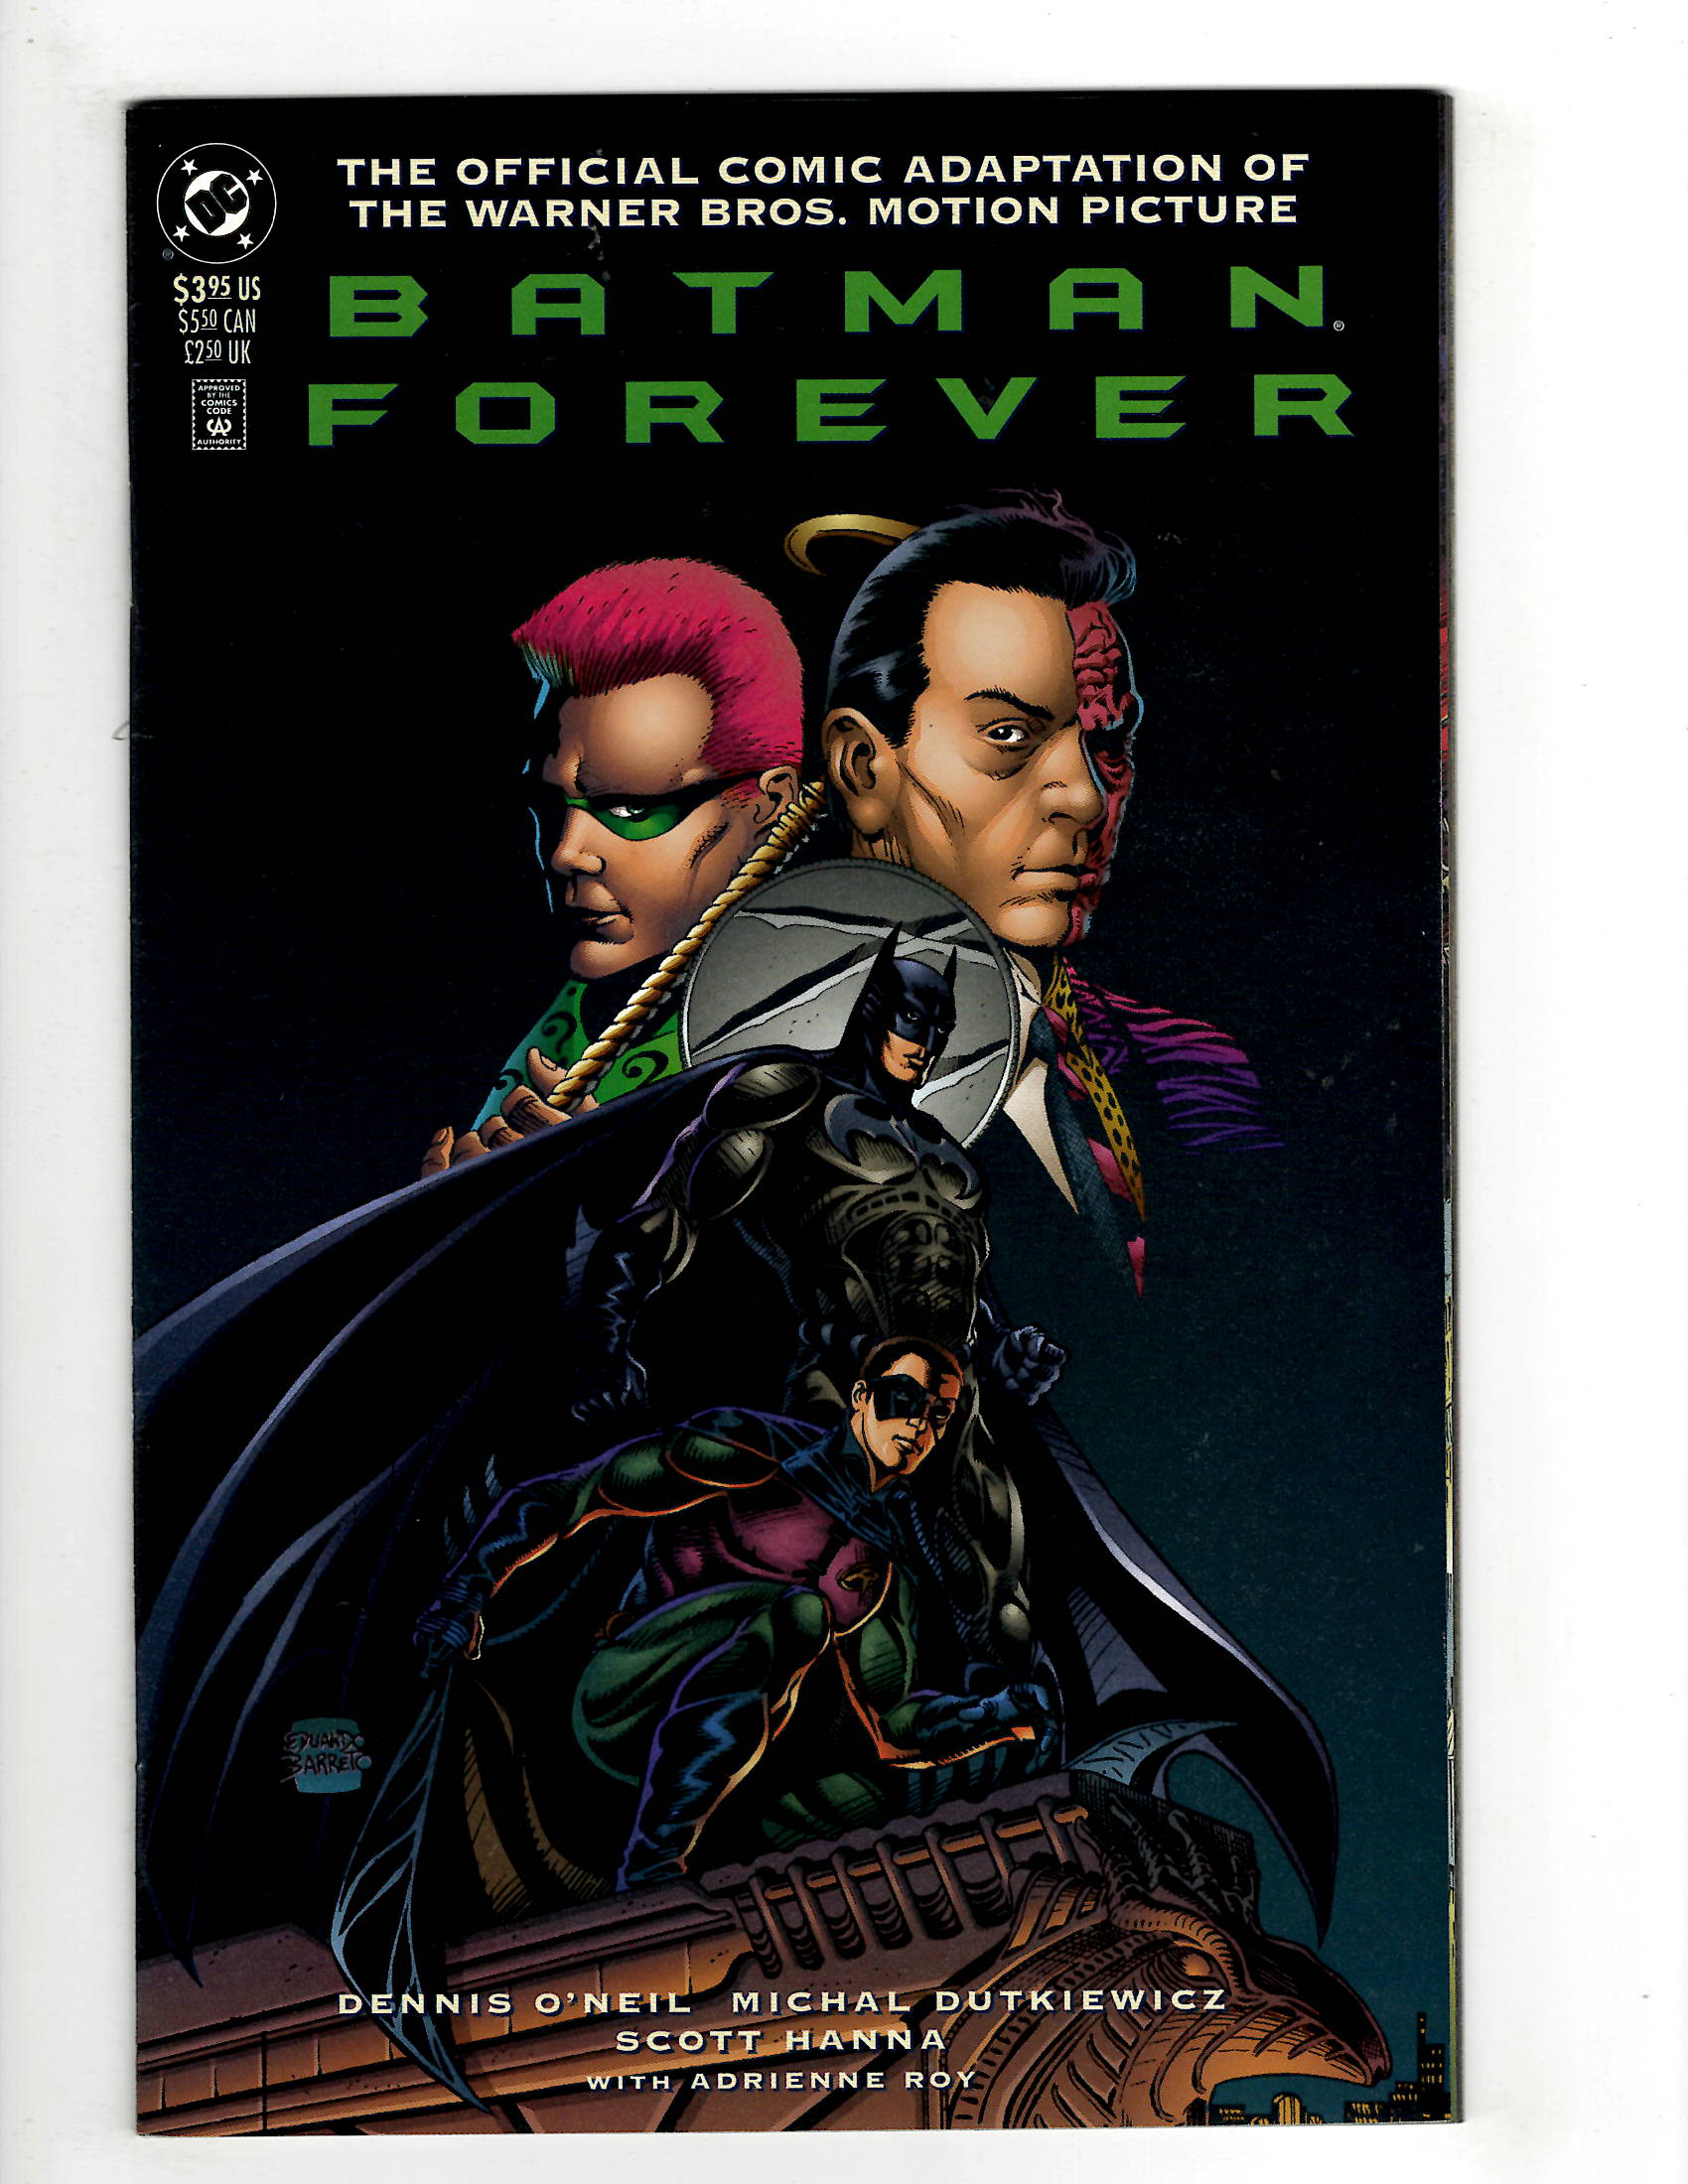 Batman Forever: The Official Adaptation of the Warner Bros. Motion Picture  #1... | Comic Books - Modern Age, DC Comics / HipComic